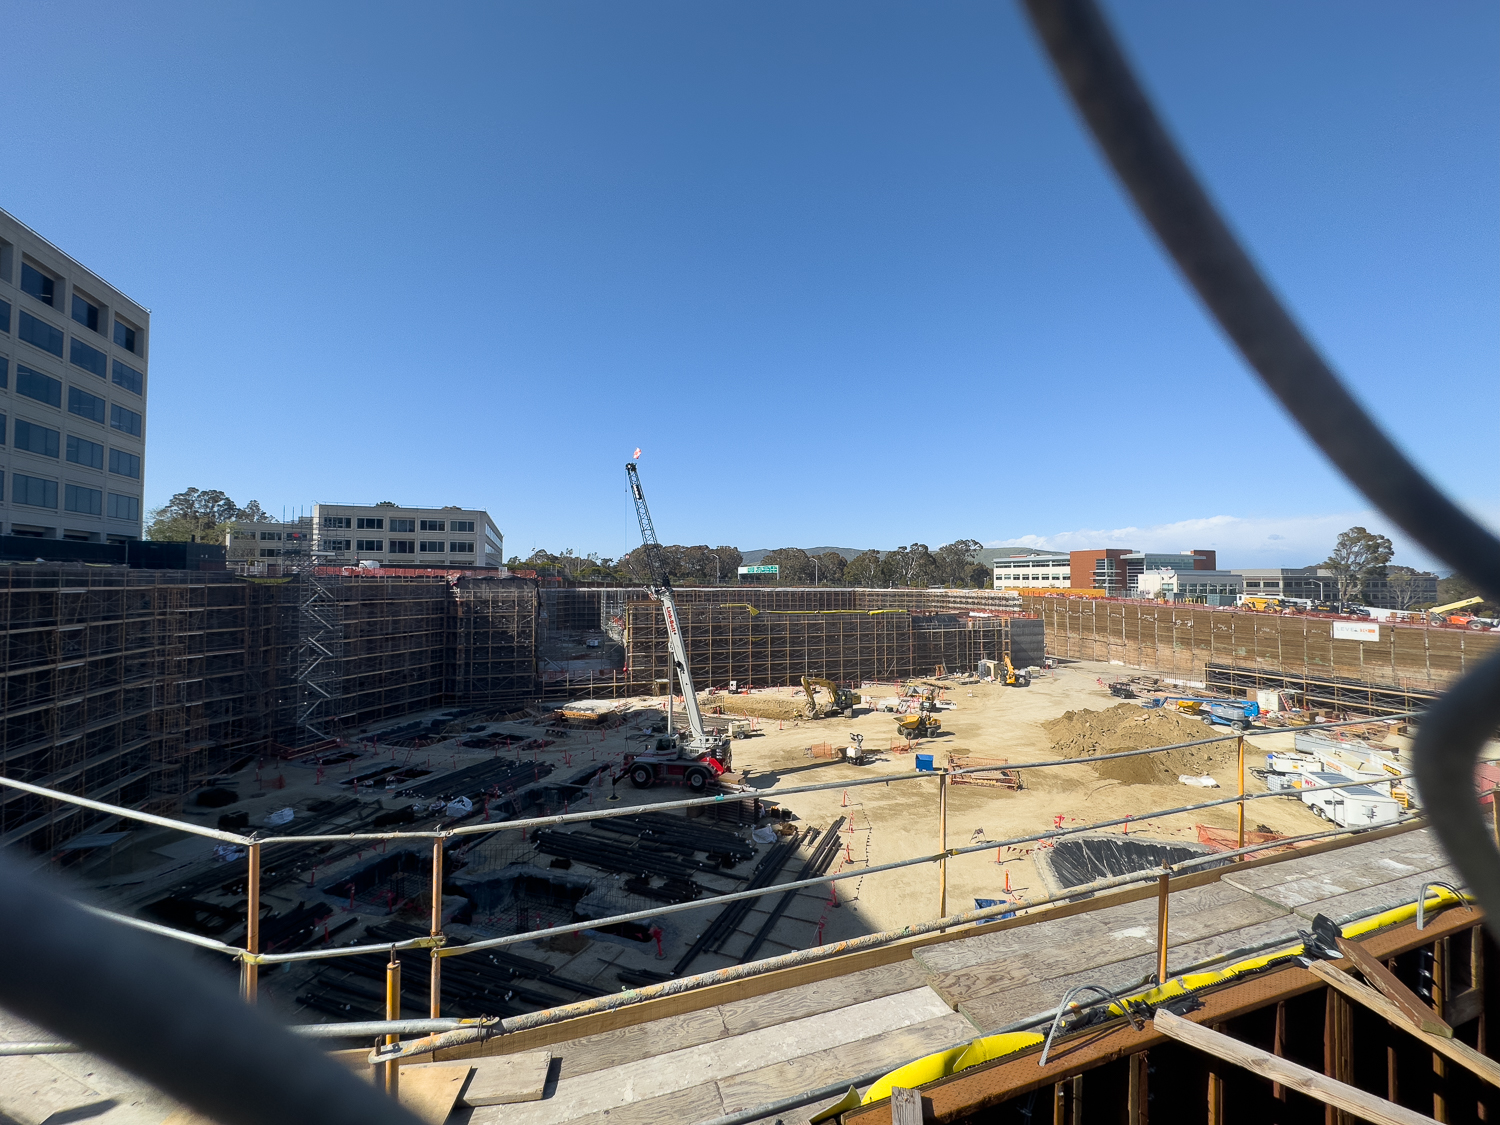 YouTube HQ construction site, image by author